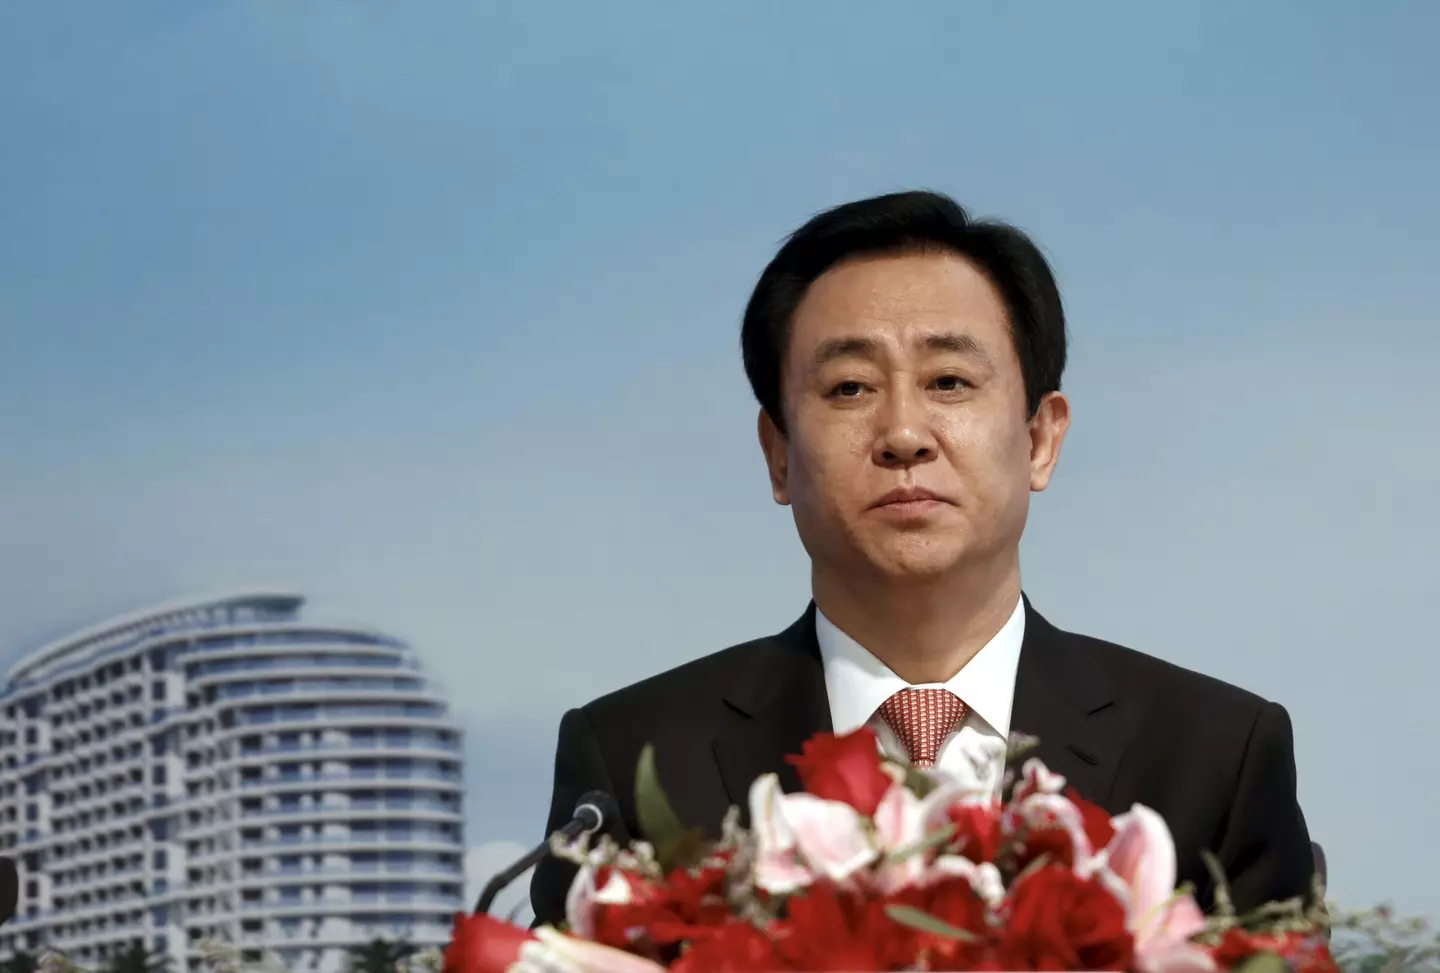 The Chairman of the Evergrande Group has lost over 90 per cent of his wealth.